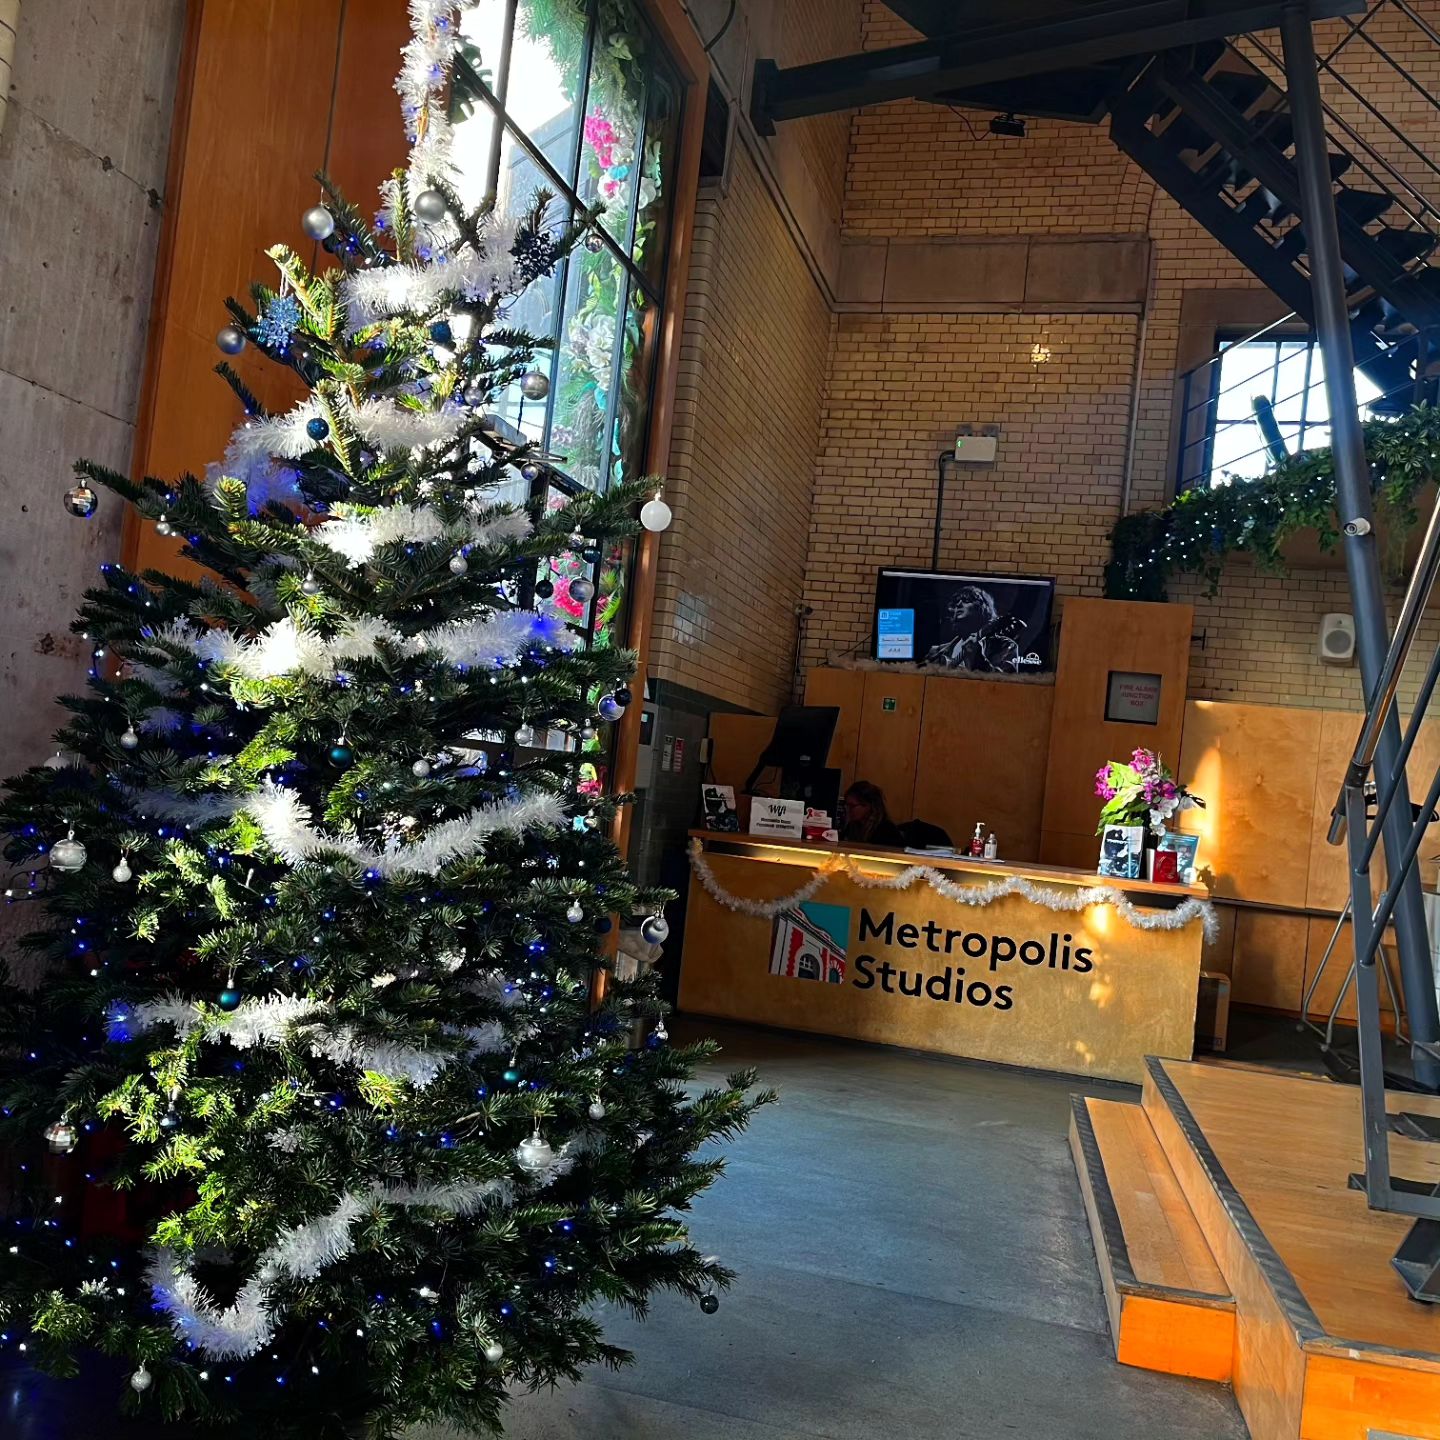 Metropolis is feeling the Christmas spirit!

The trees, tinsel, and lights are all up, and we even had some special seasonal guests make an appearance, causing havoc around the studios. 🧑‍

We hope everyone is looking forward to the holiday period, Merry Metropolis-mas!